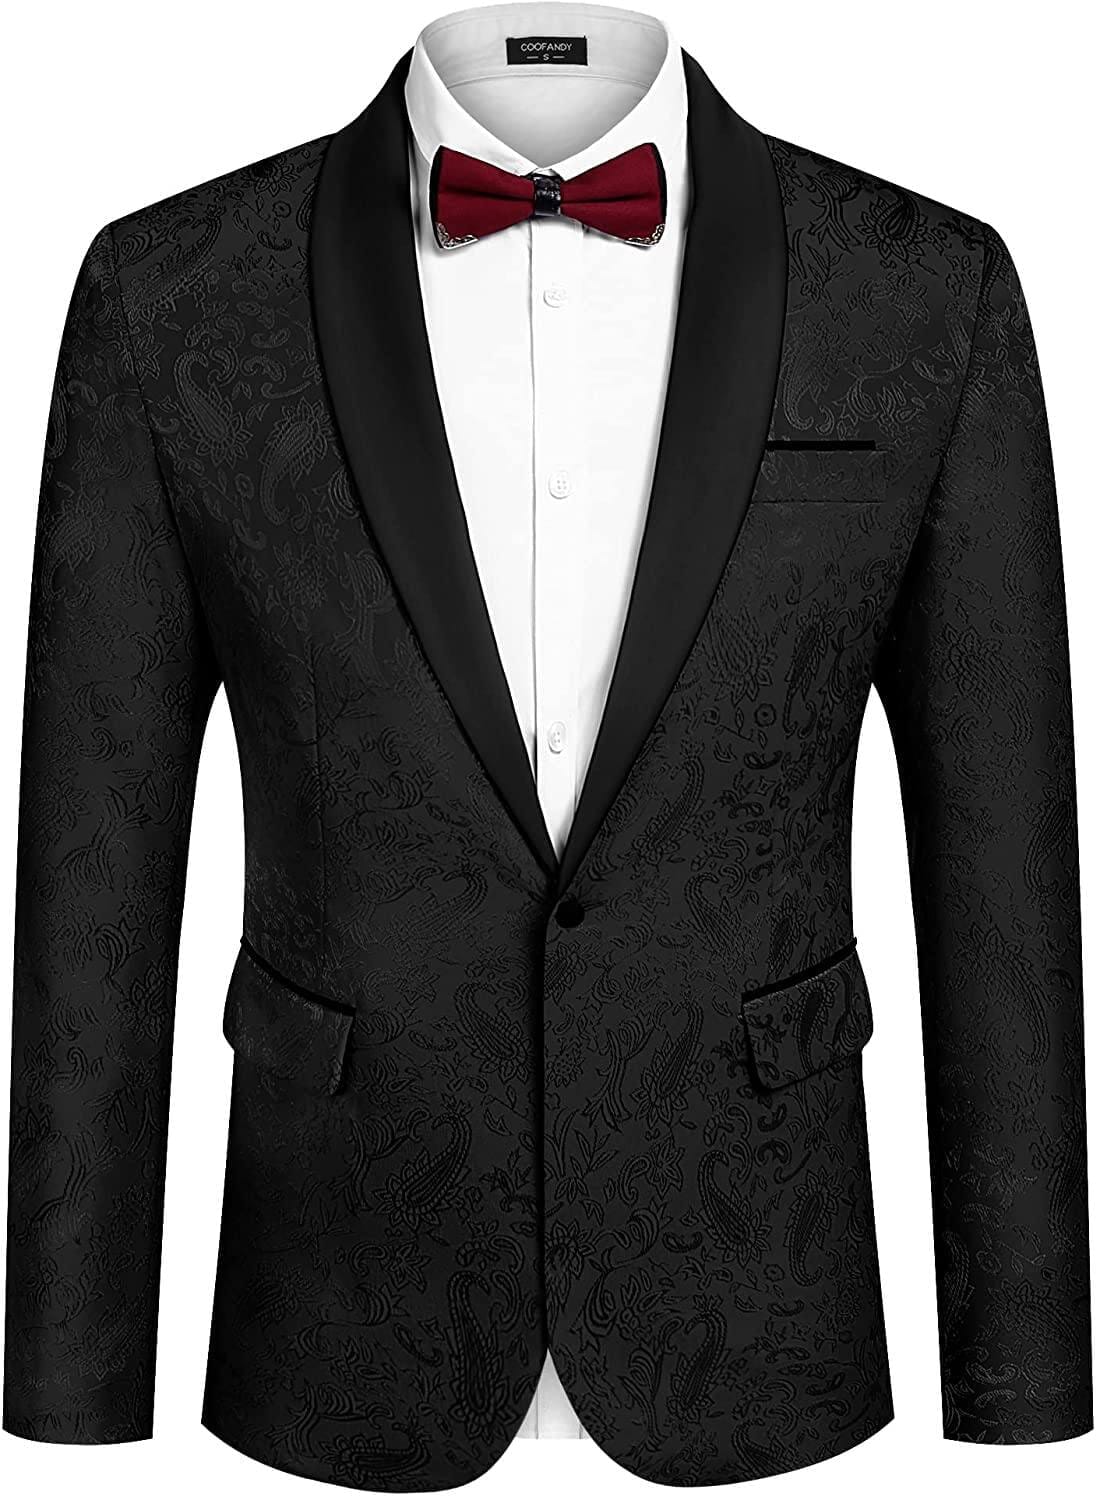 Stylish One Button Suit Blazer for Men - US Only, Free Delivery – COOFANDY